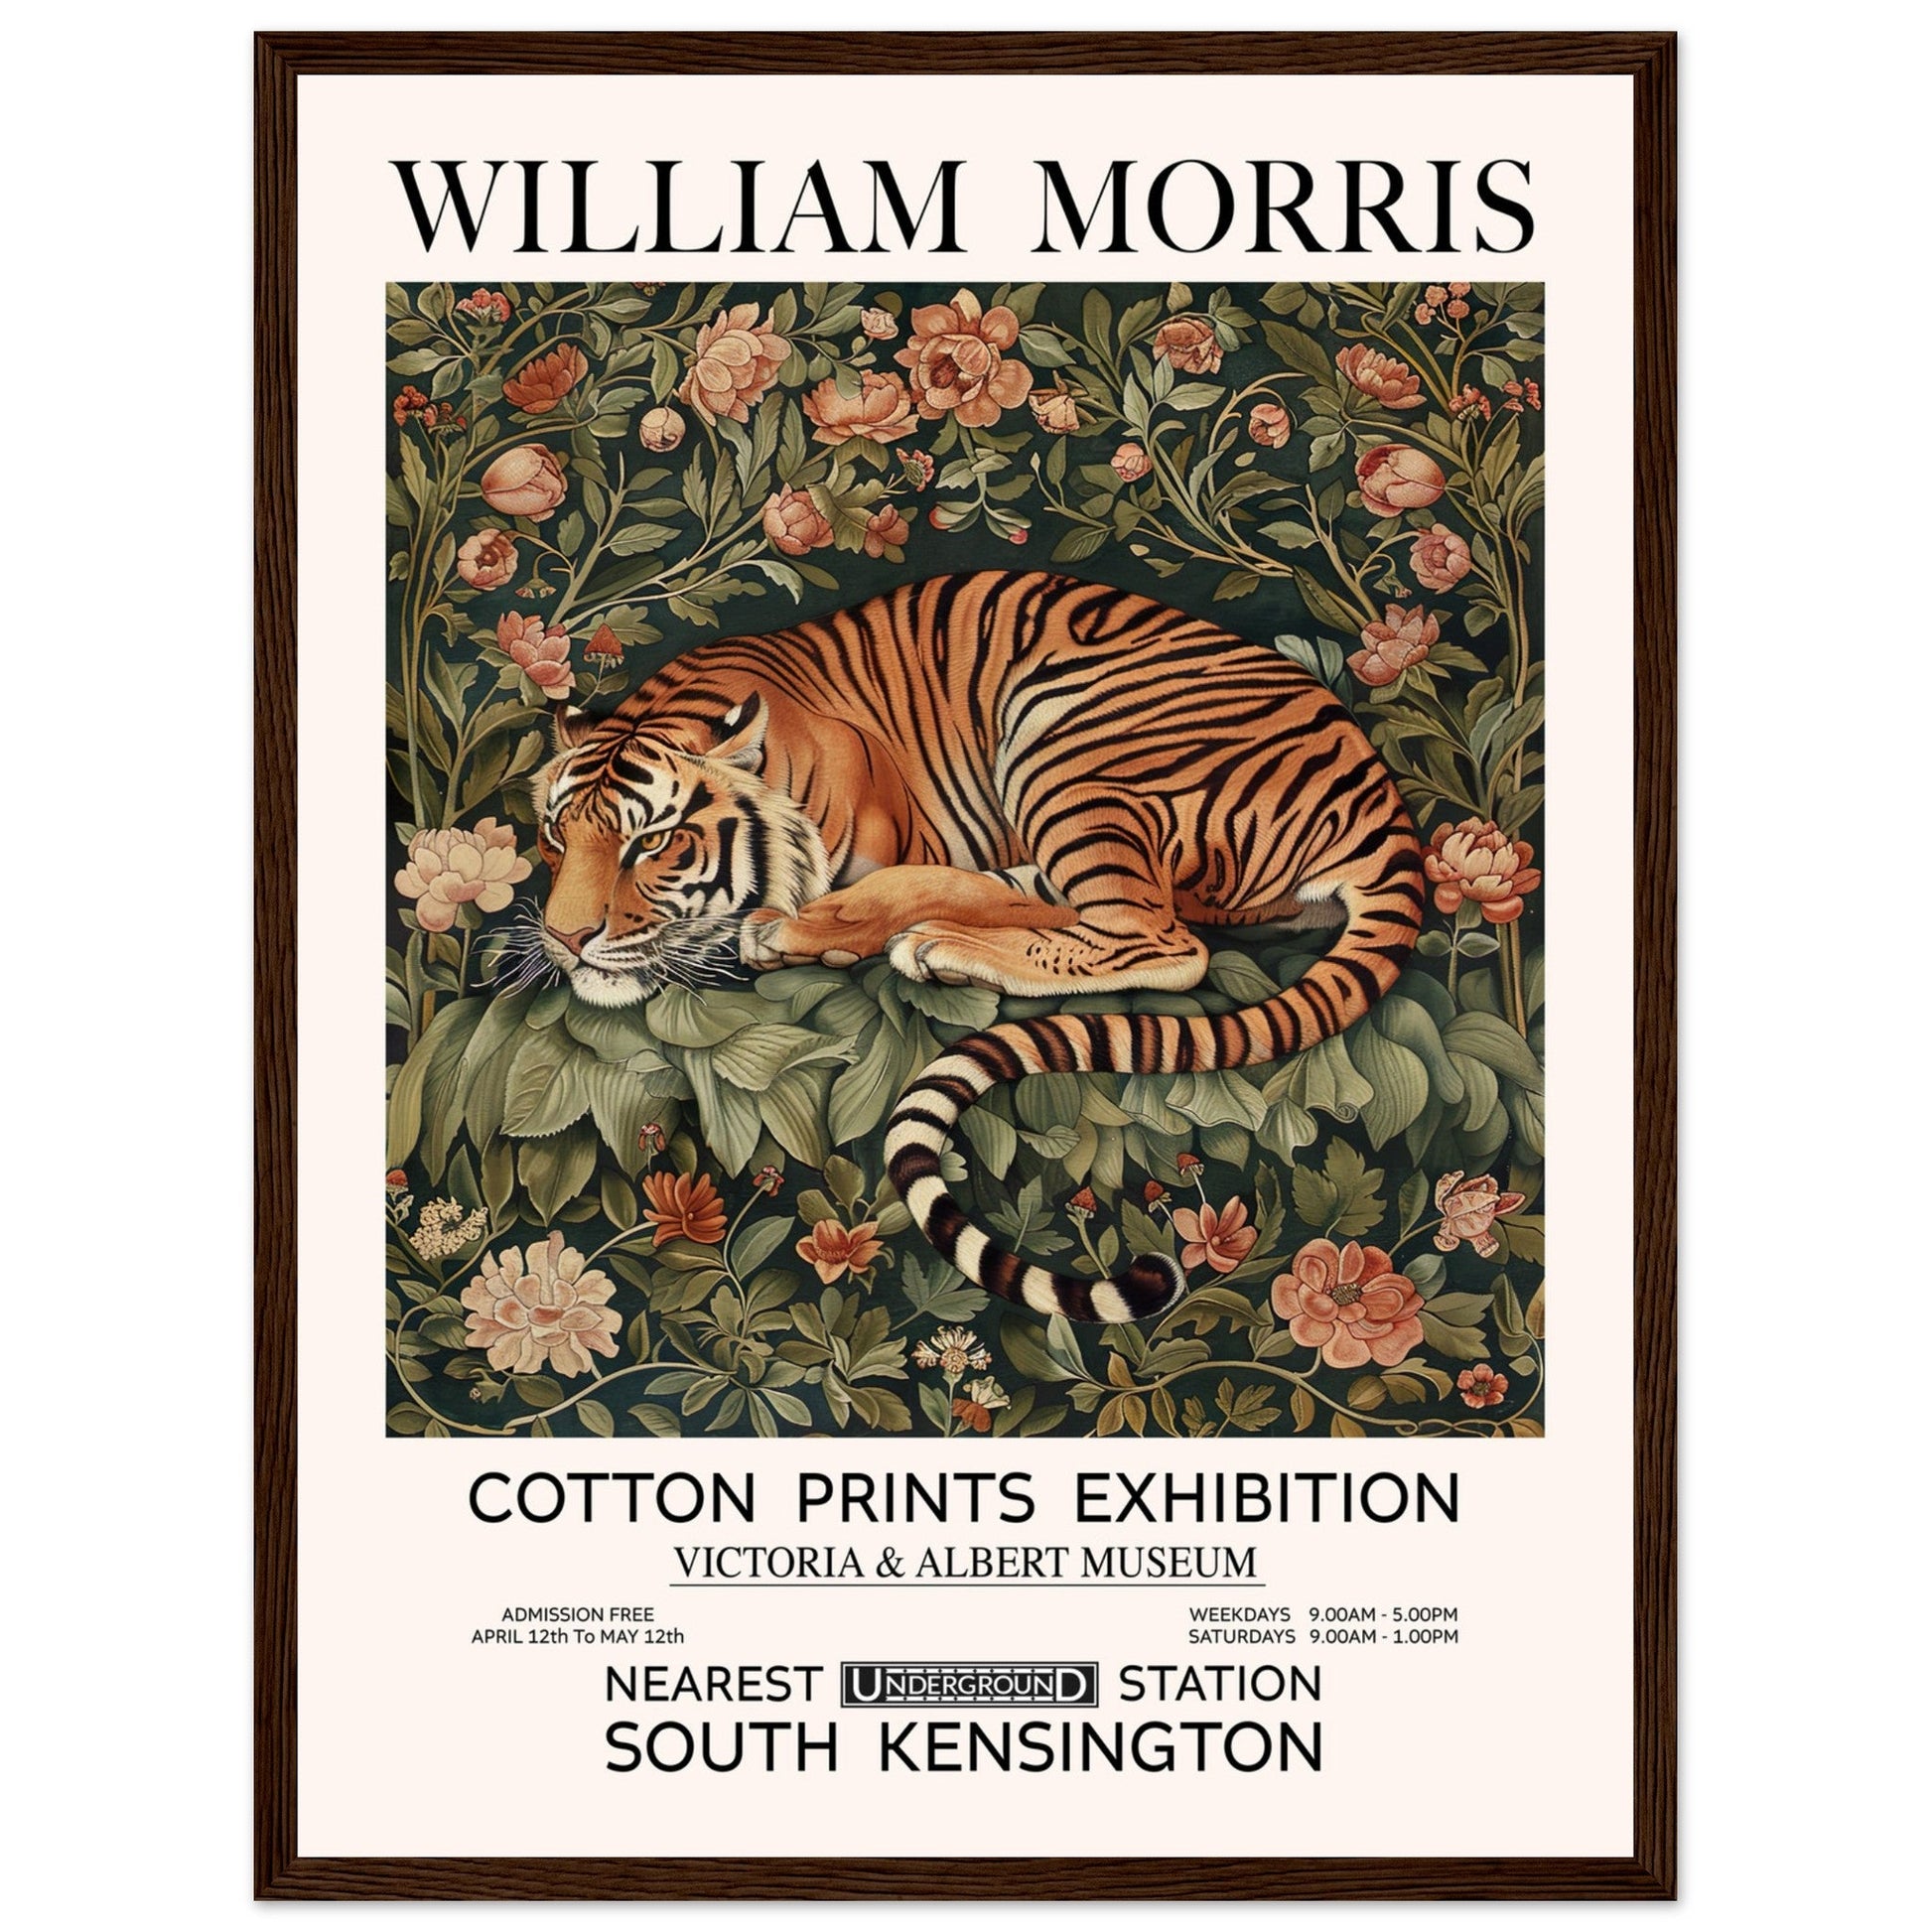 The Tiger In Flowers - Framed Poster, The Tiger In Flowers, Vintage Art print, william morris framed, #illieeart